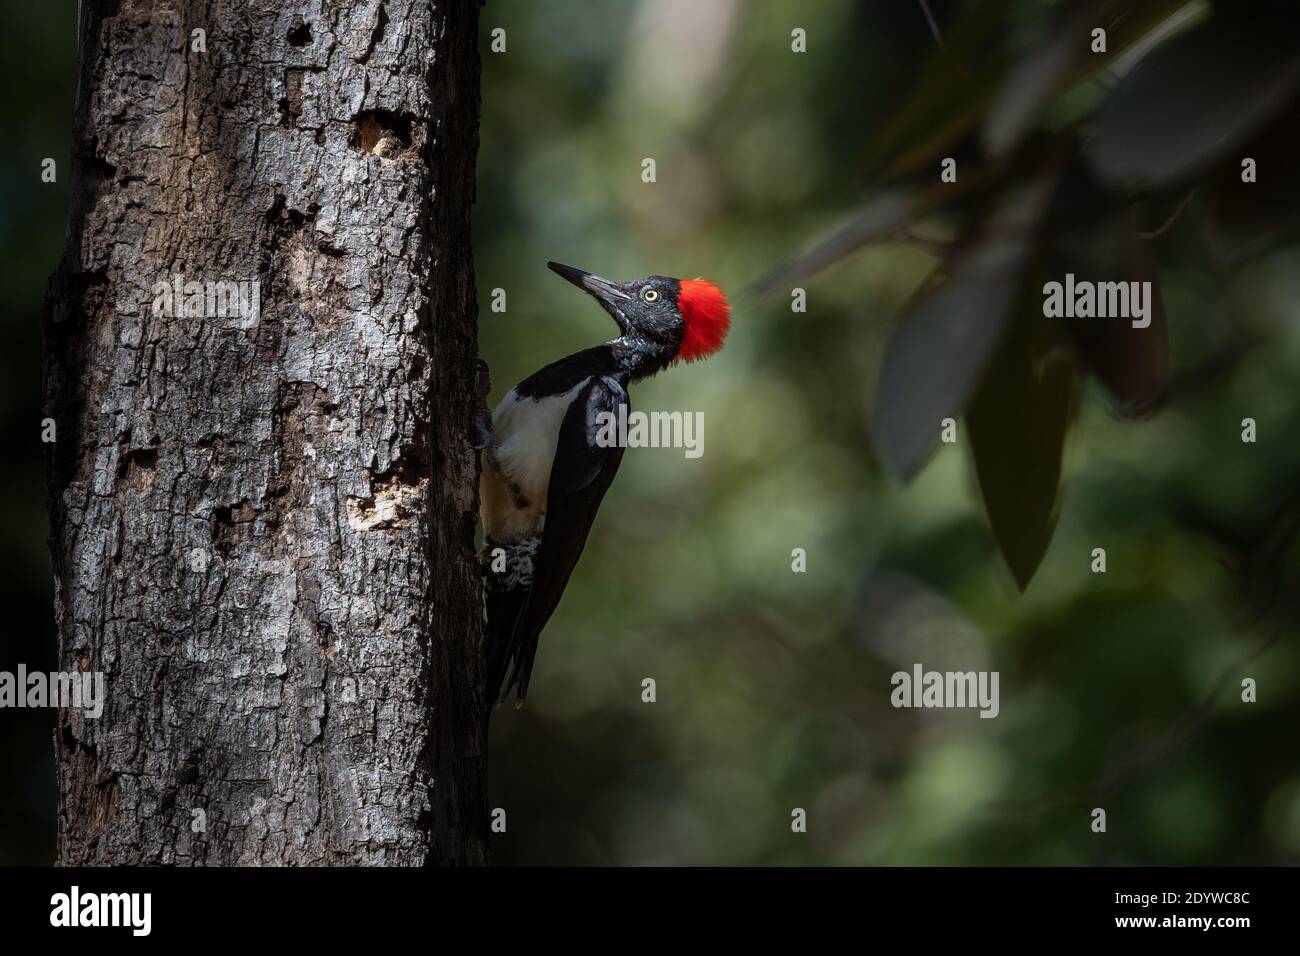 The white-bellied woodpecker or great black woodpecker (Dryocopus javensis) is found in evergreen forests of tropical Asia. Stock Photo